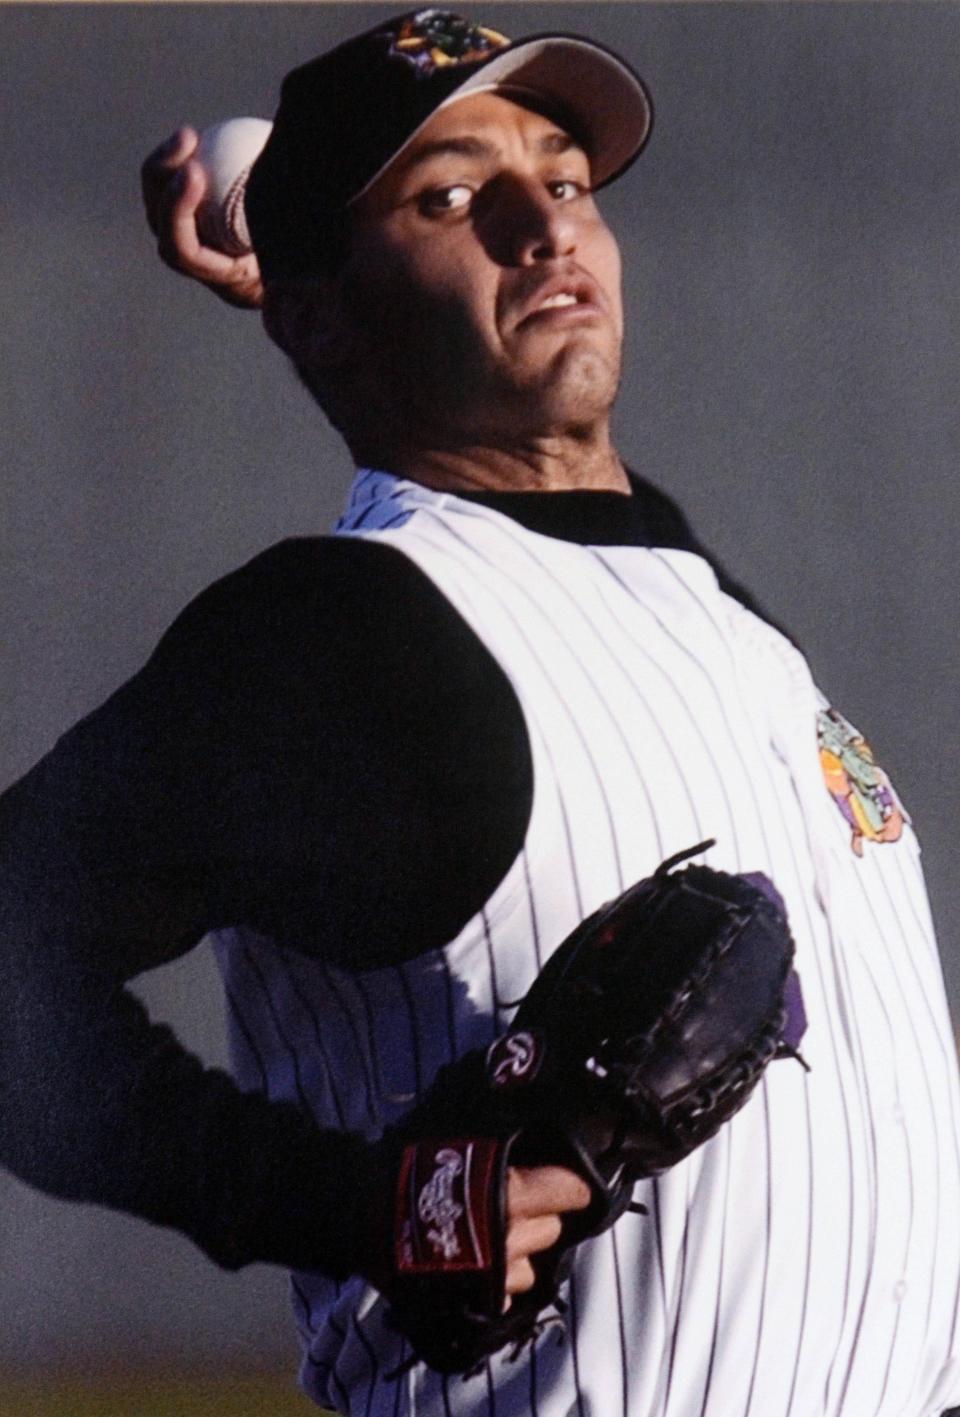 New York Yankees pitcher Andy Pettitte, wearing a Norwich Navigators cap, throws during a rehab assignment at Dodd Stadium in Norwich June 8, 2002. 